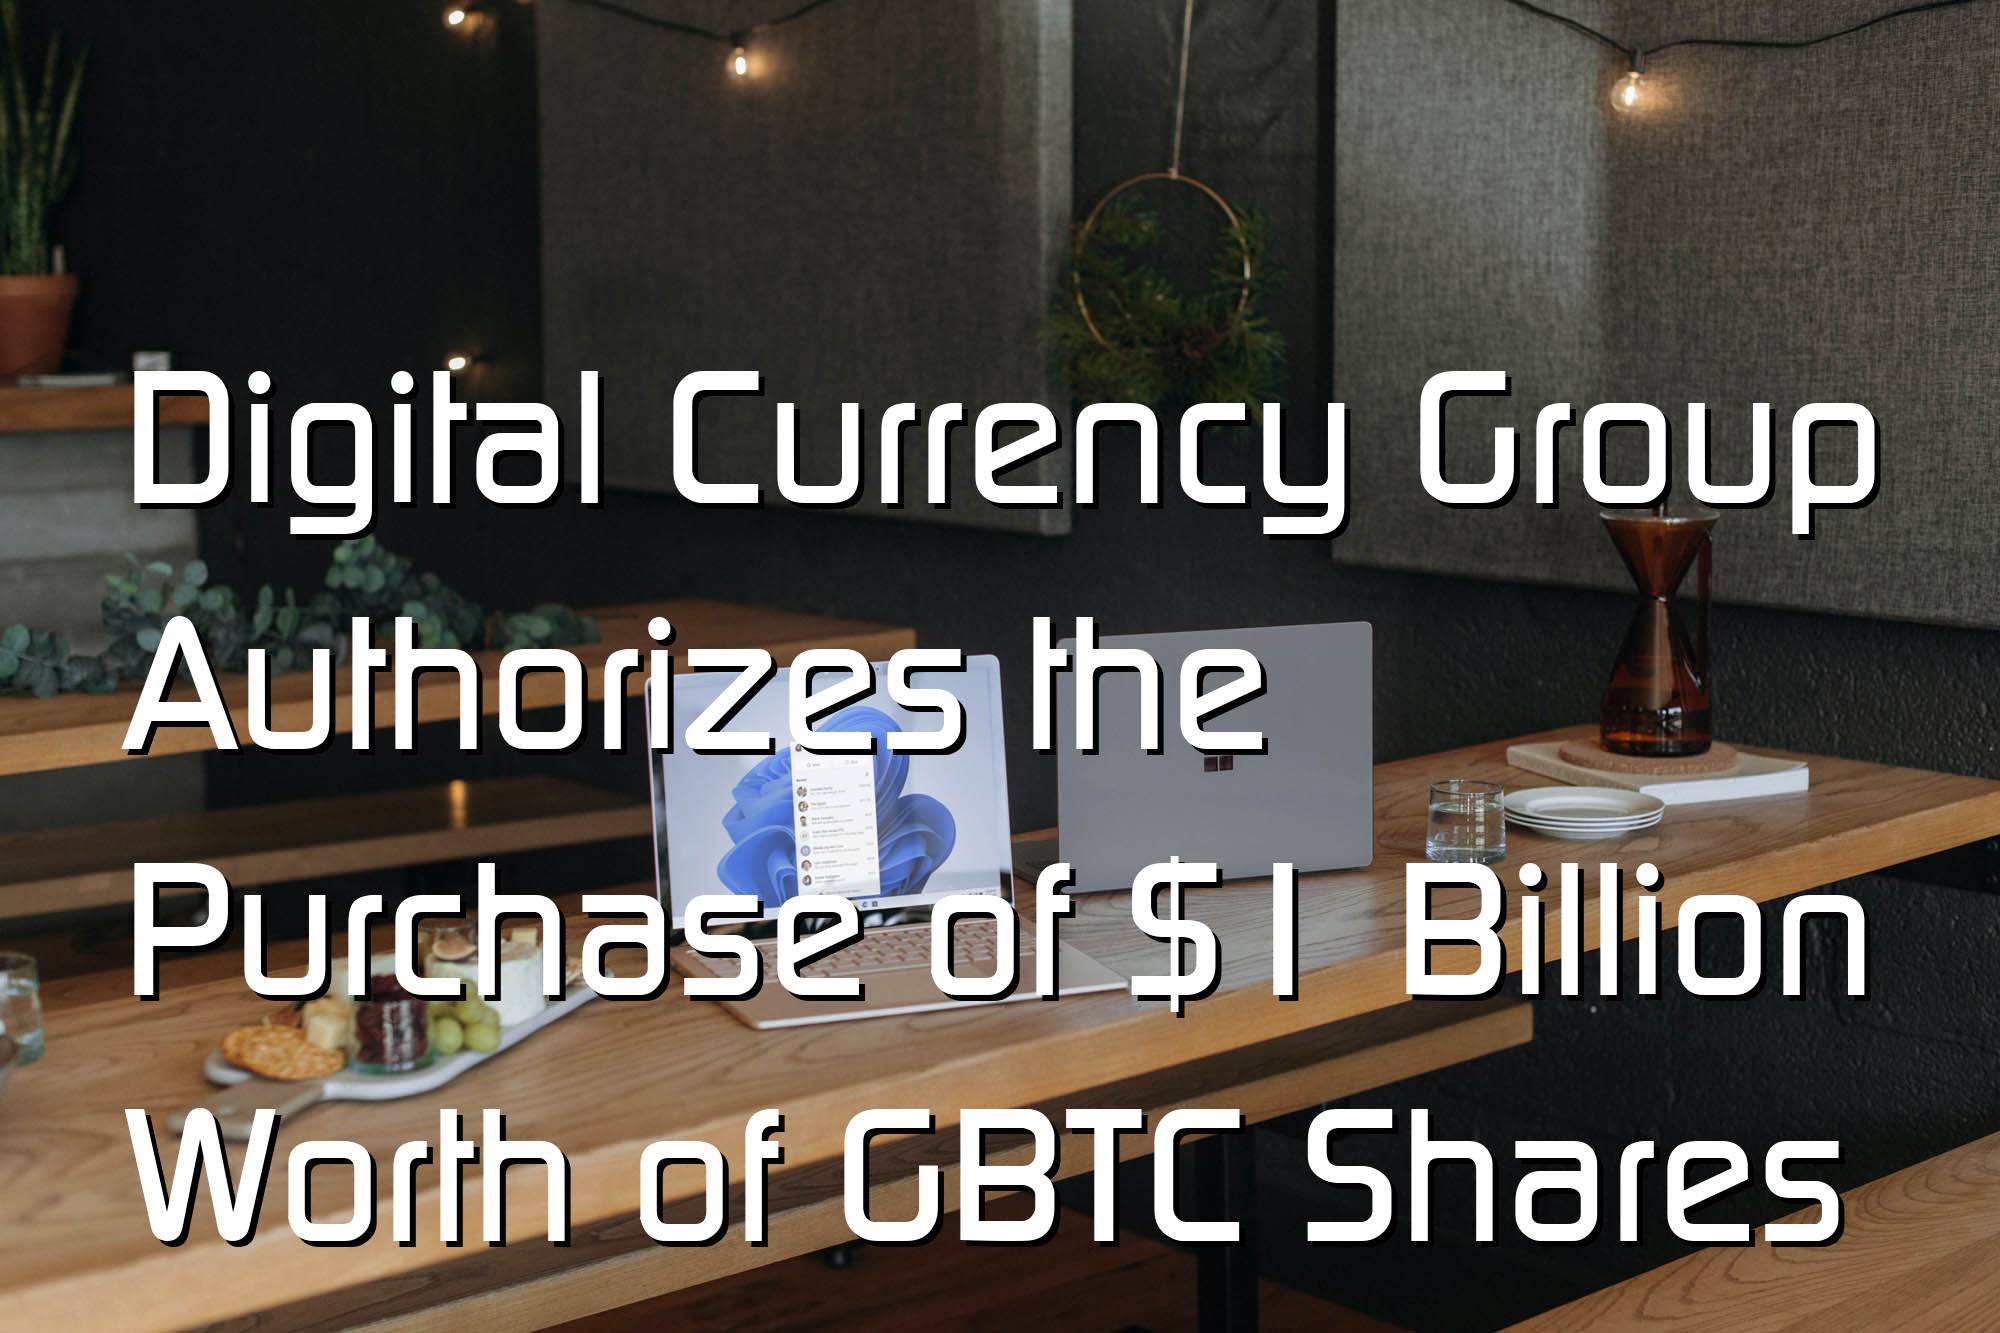 @$66729.13 Digital Currency Group Authorizes the Purchase of $1 Billion Worth of GBTC Shares